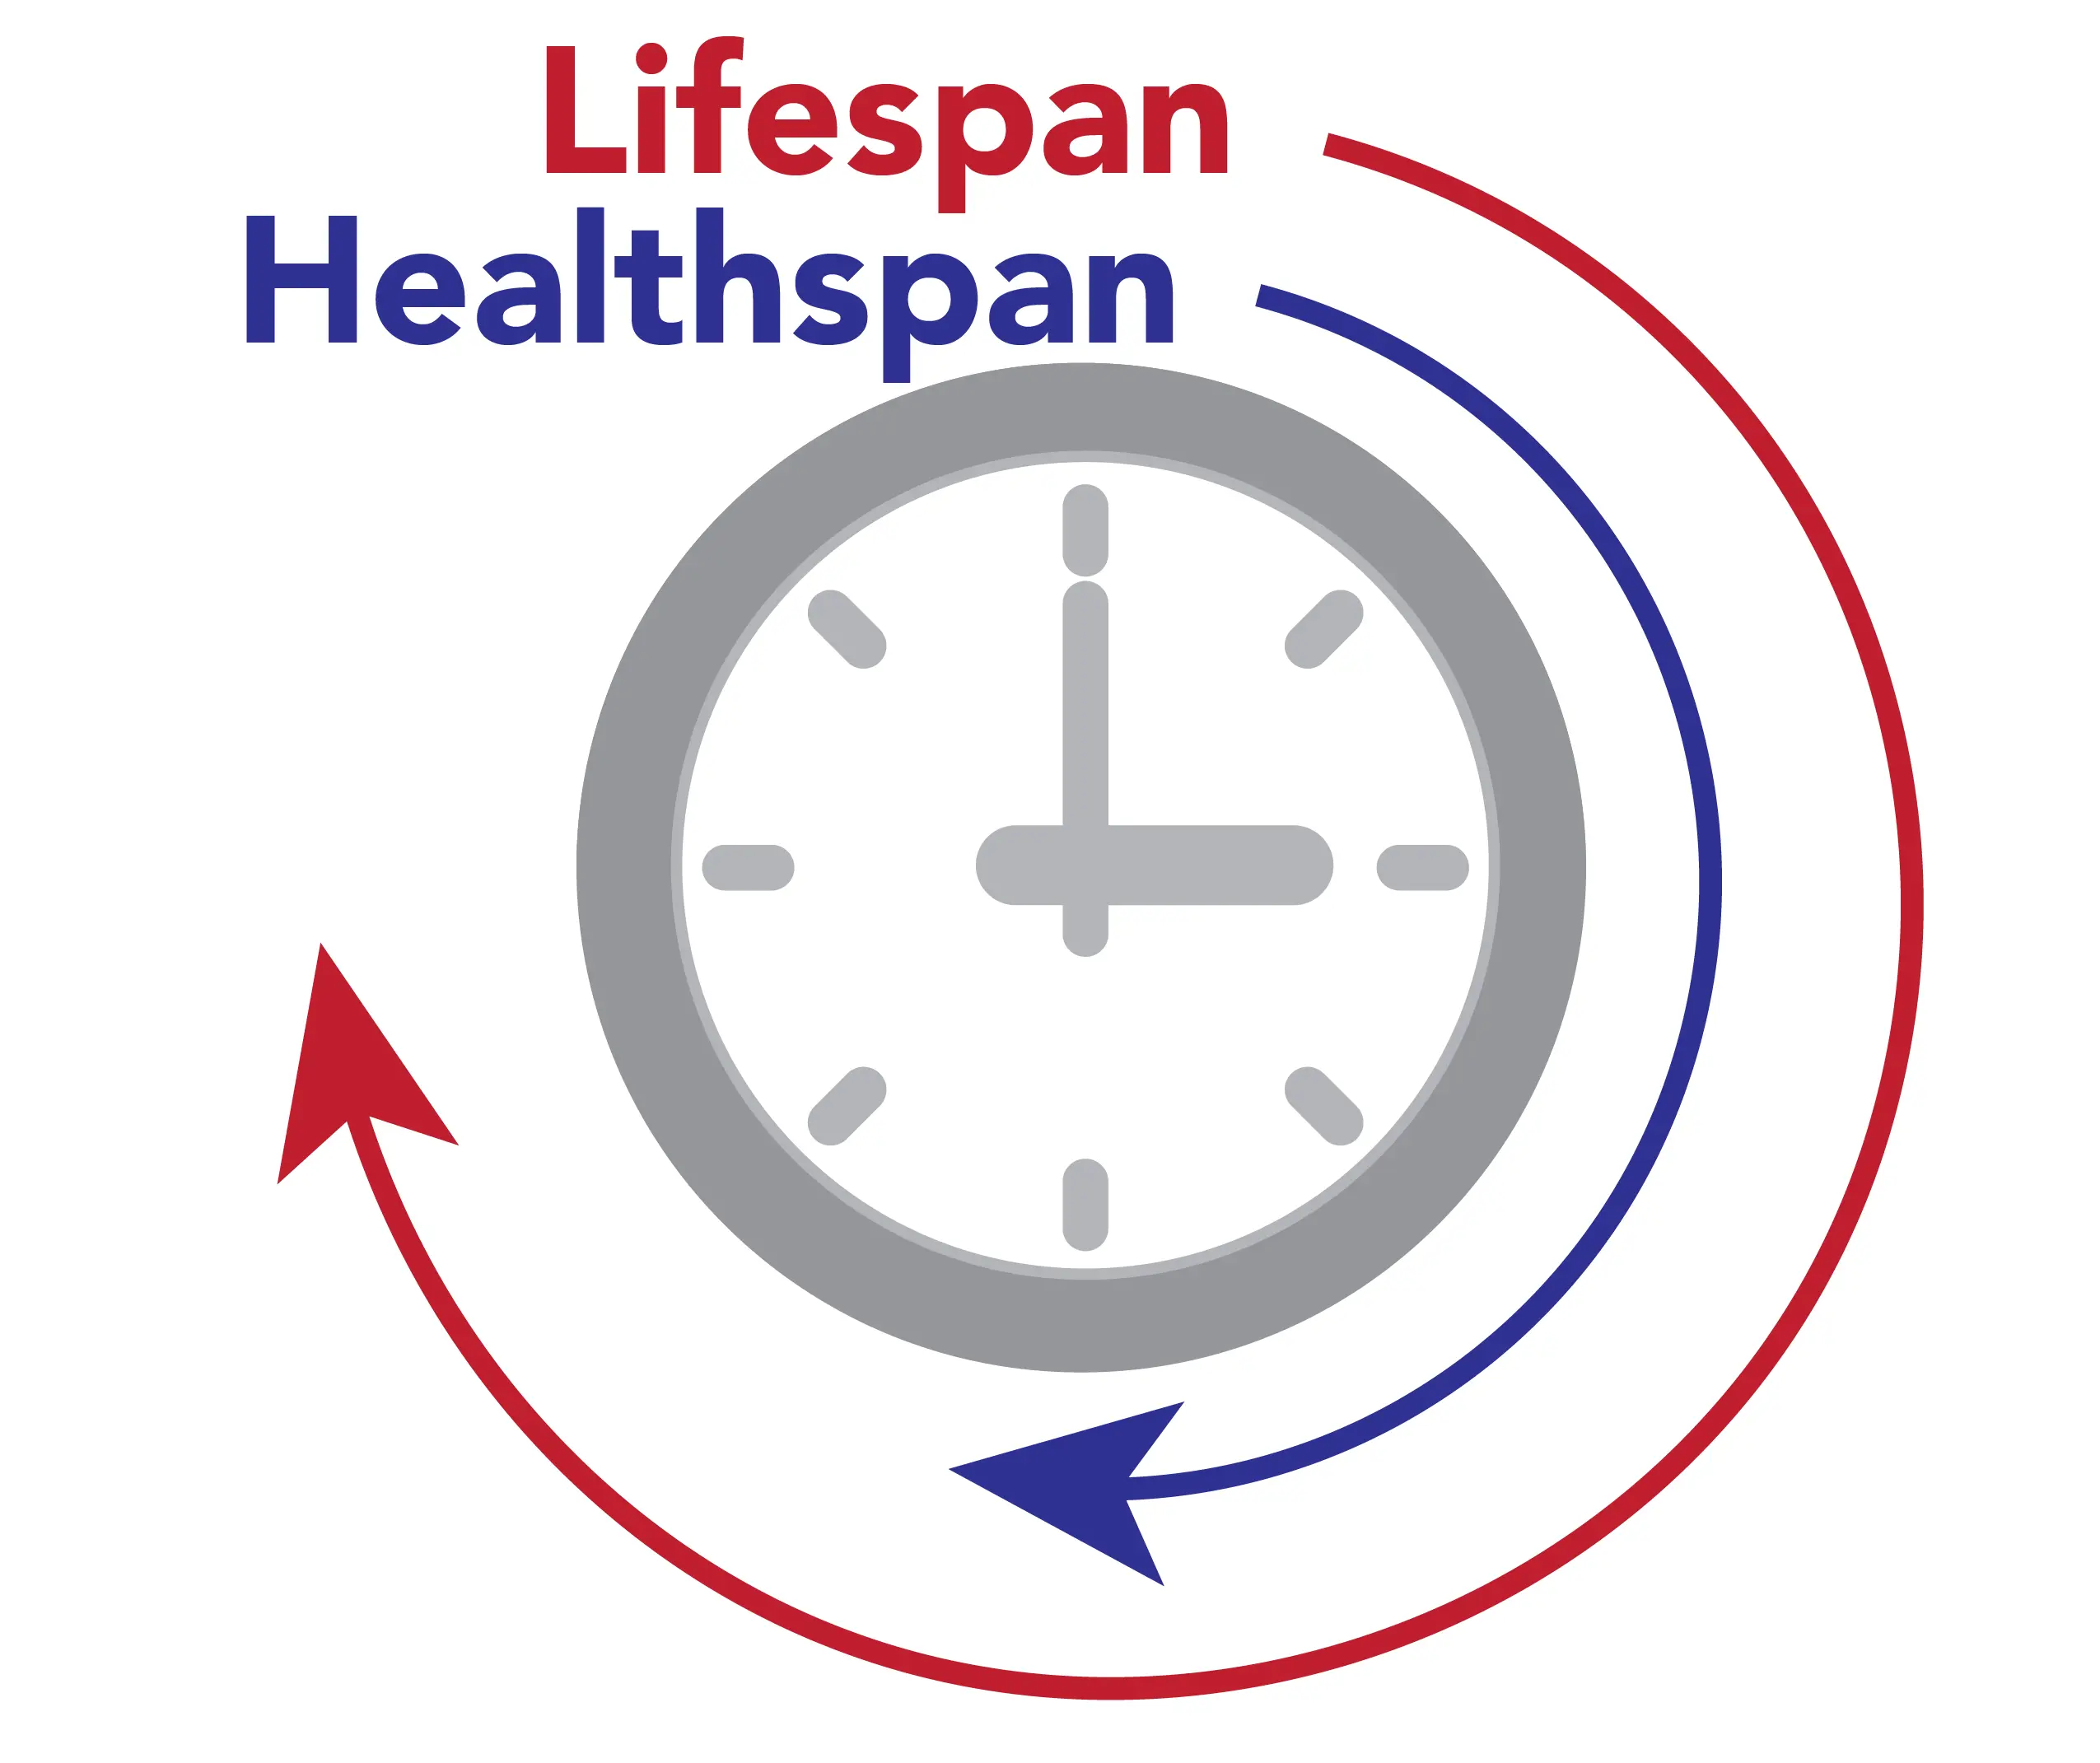 The average healthspan is unfortunately much shorter than the average lifespan.